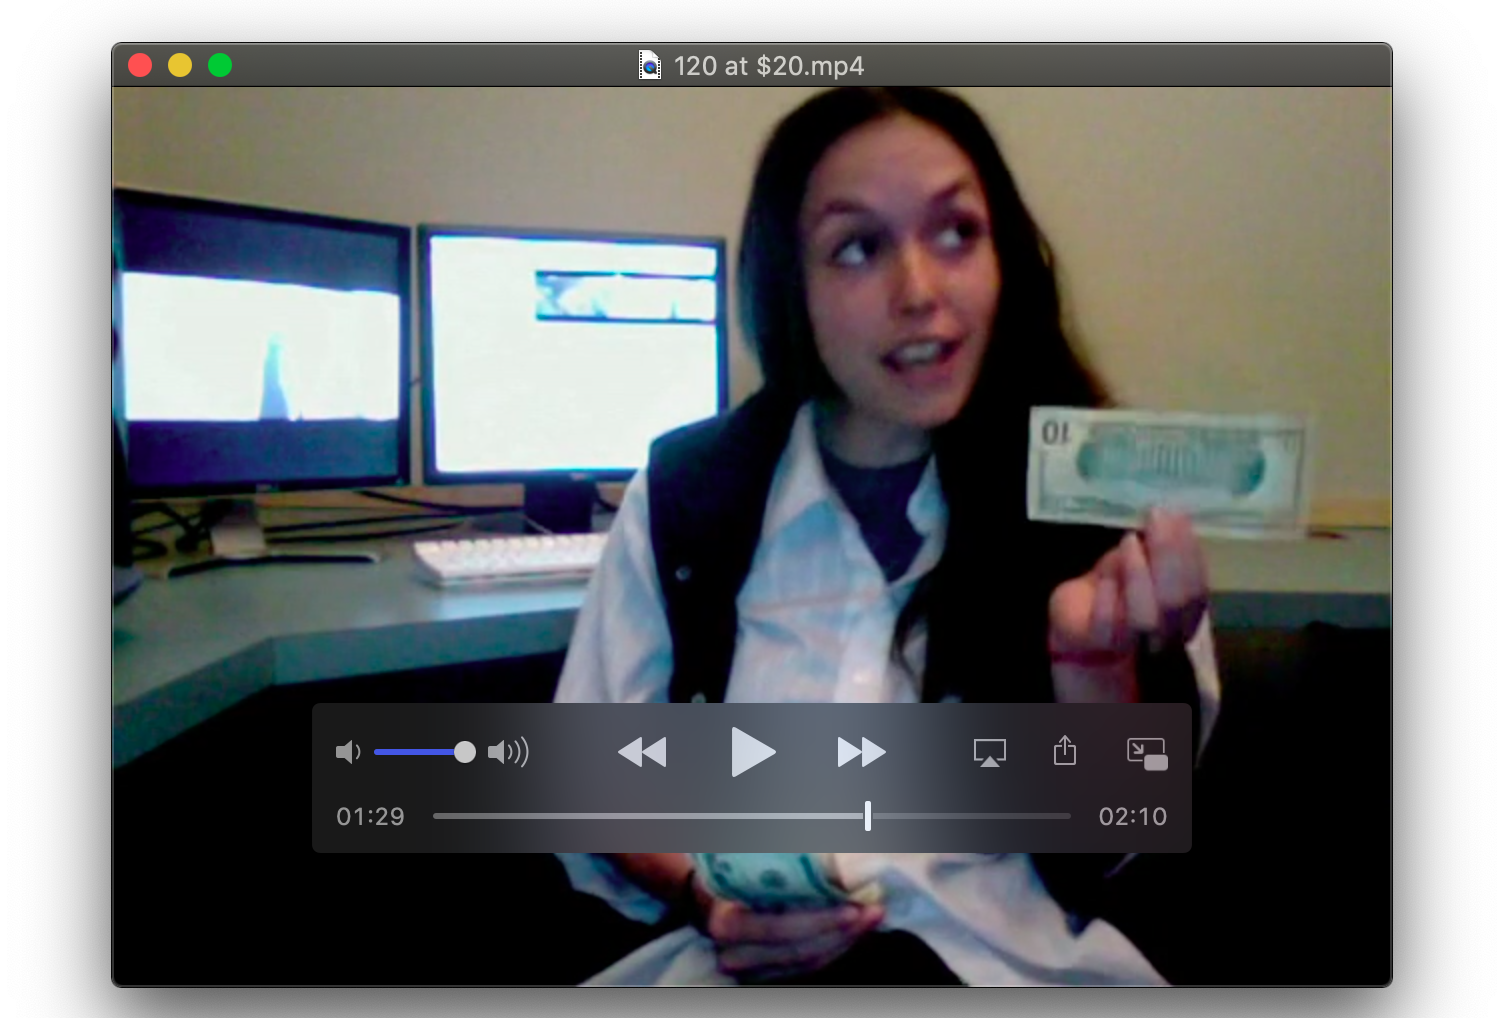 A screenshot of a video in which a person with long hair and a white shirt is holding a ten dollar bill upside down. The bill is pressed between her index finger and thumb, and the person is gazing up and to the left.